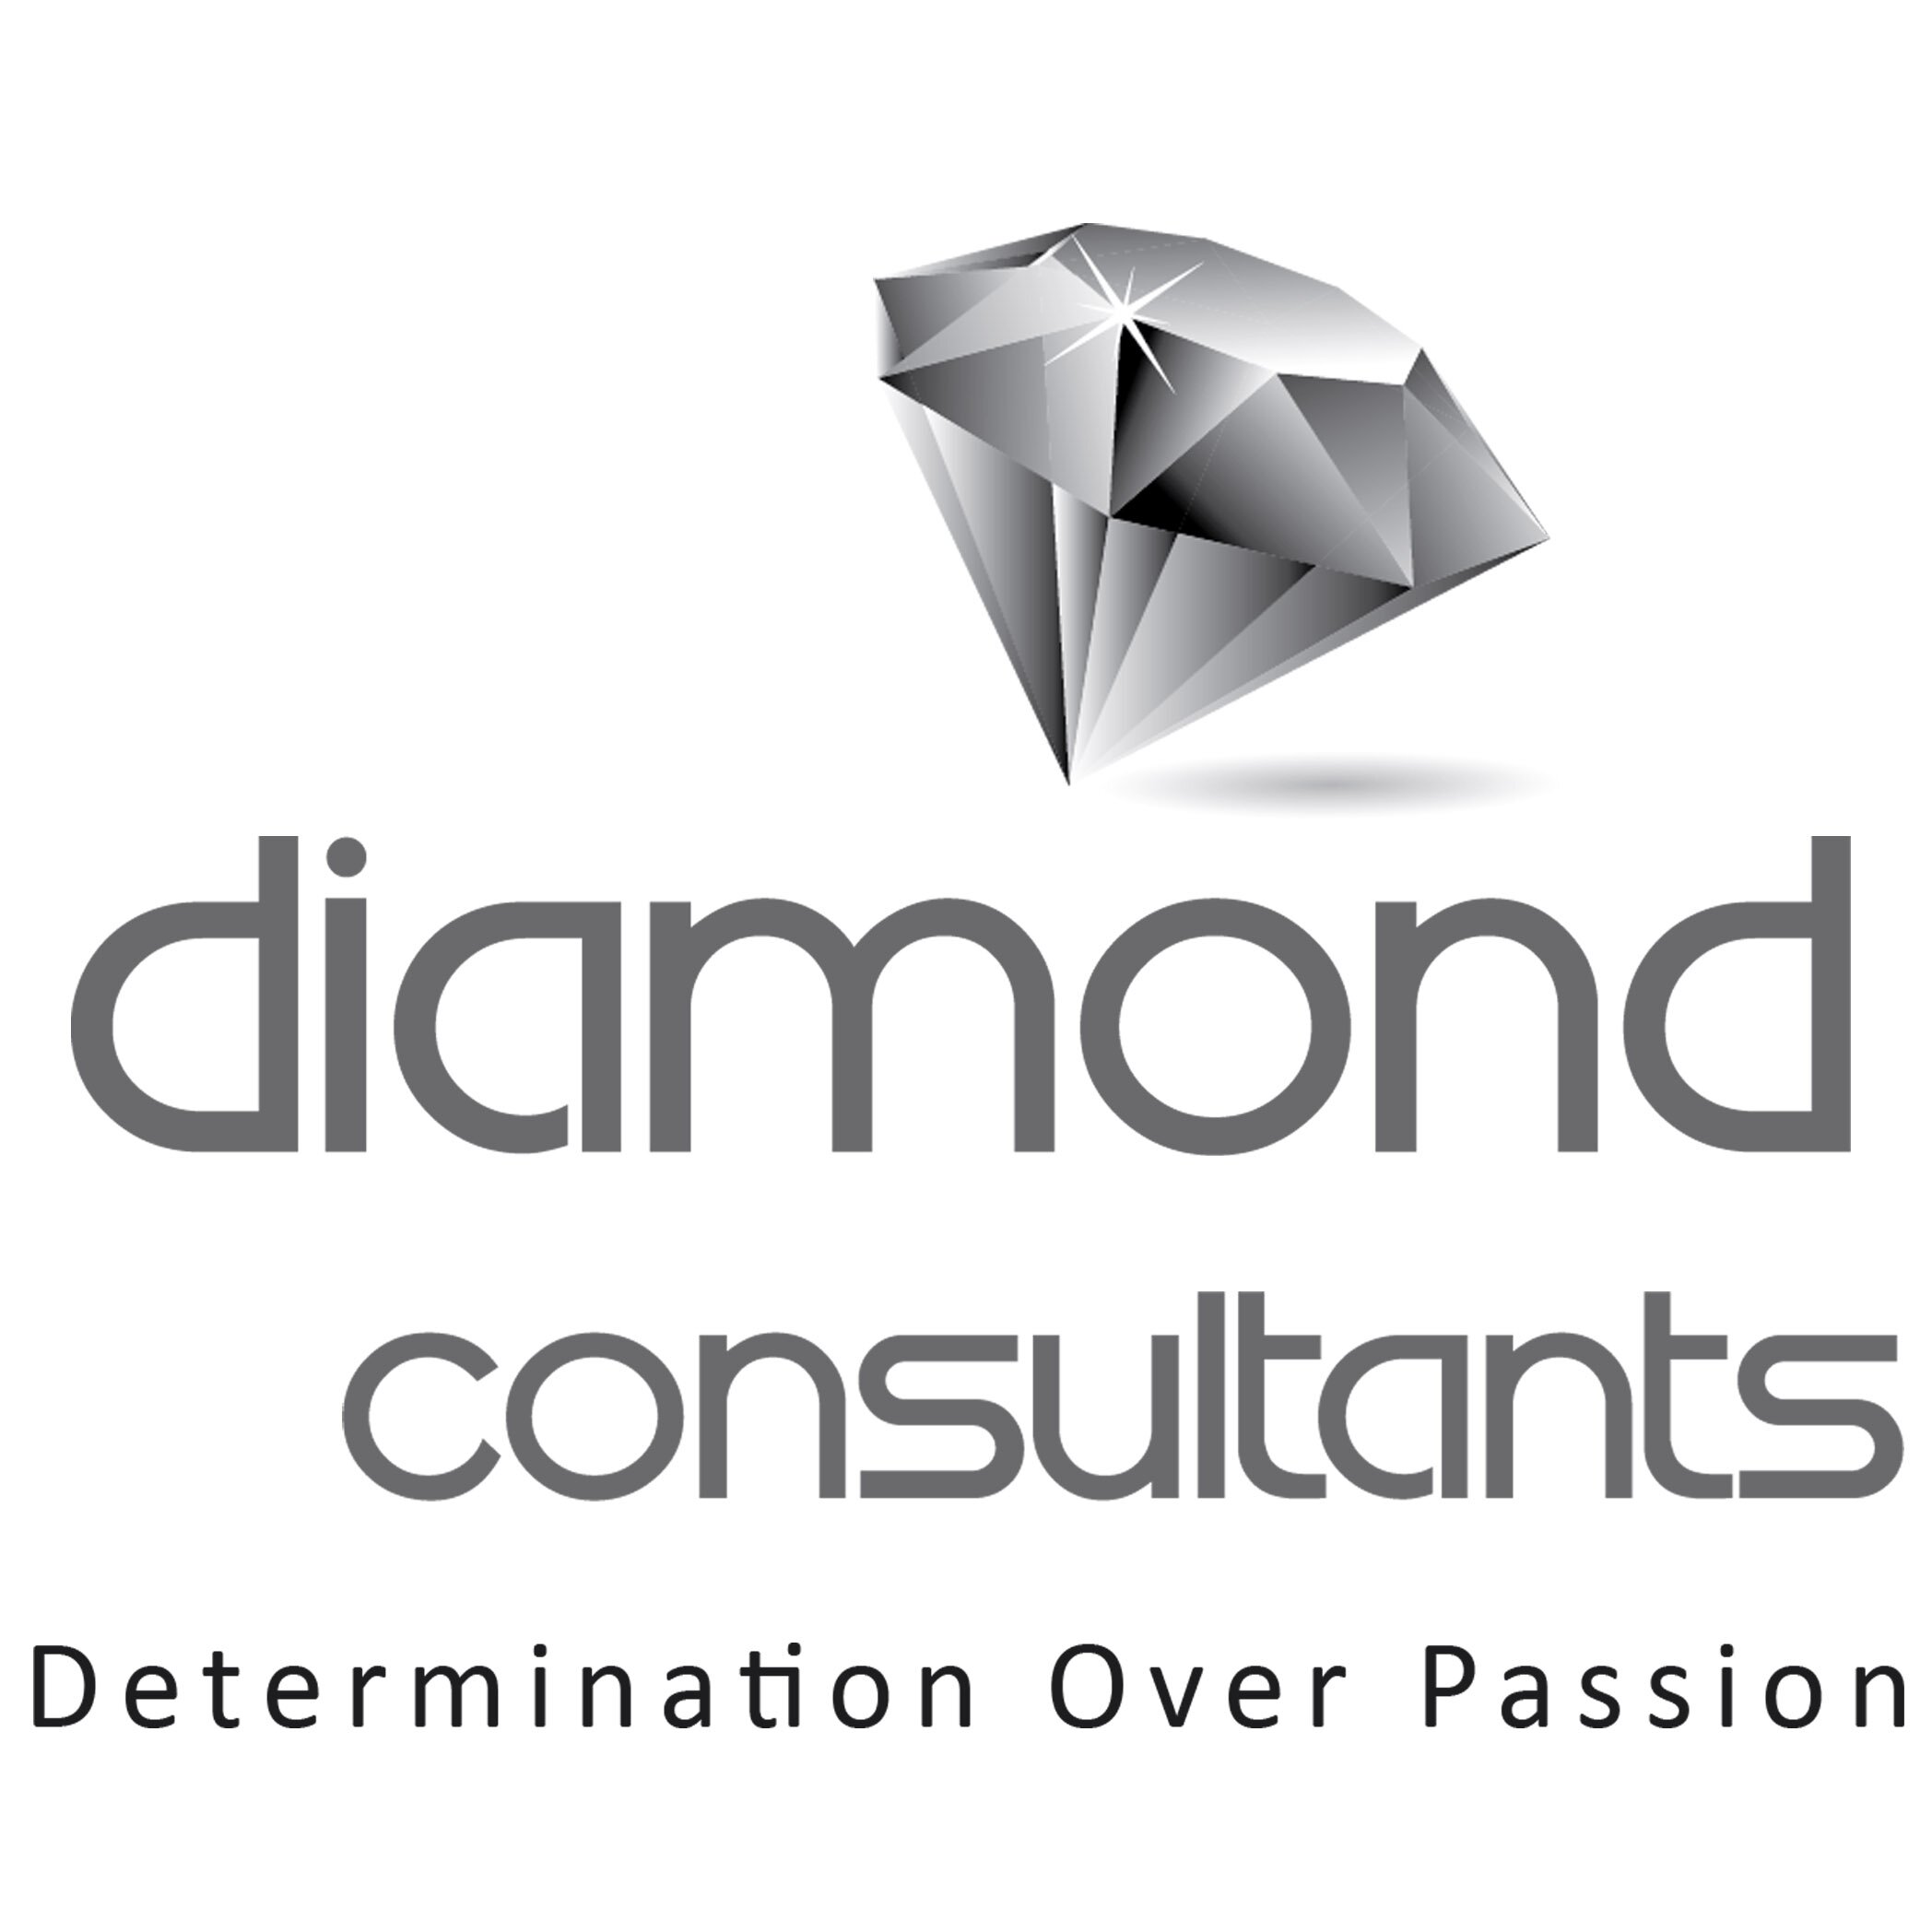 We deal in the following products
Loose Diamonds (Wholesale)
Rough Diamonds (Wholesale)
Customised Premium Diamond Jewellery (Wholesale/Retail)